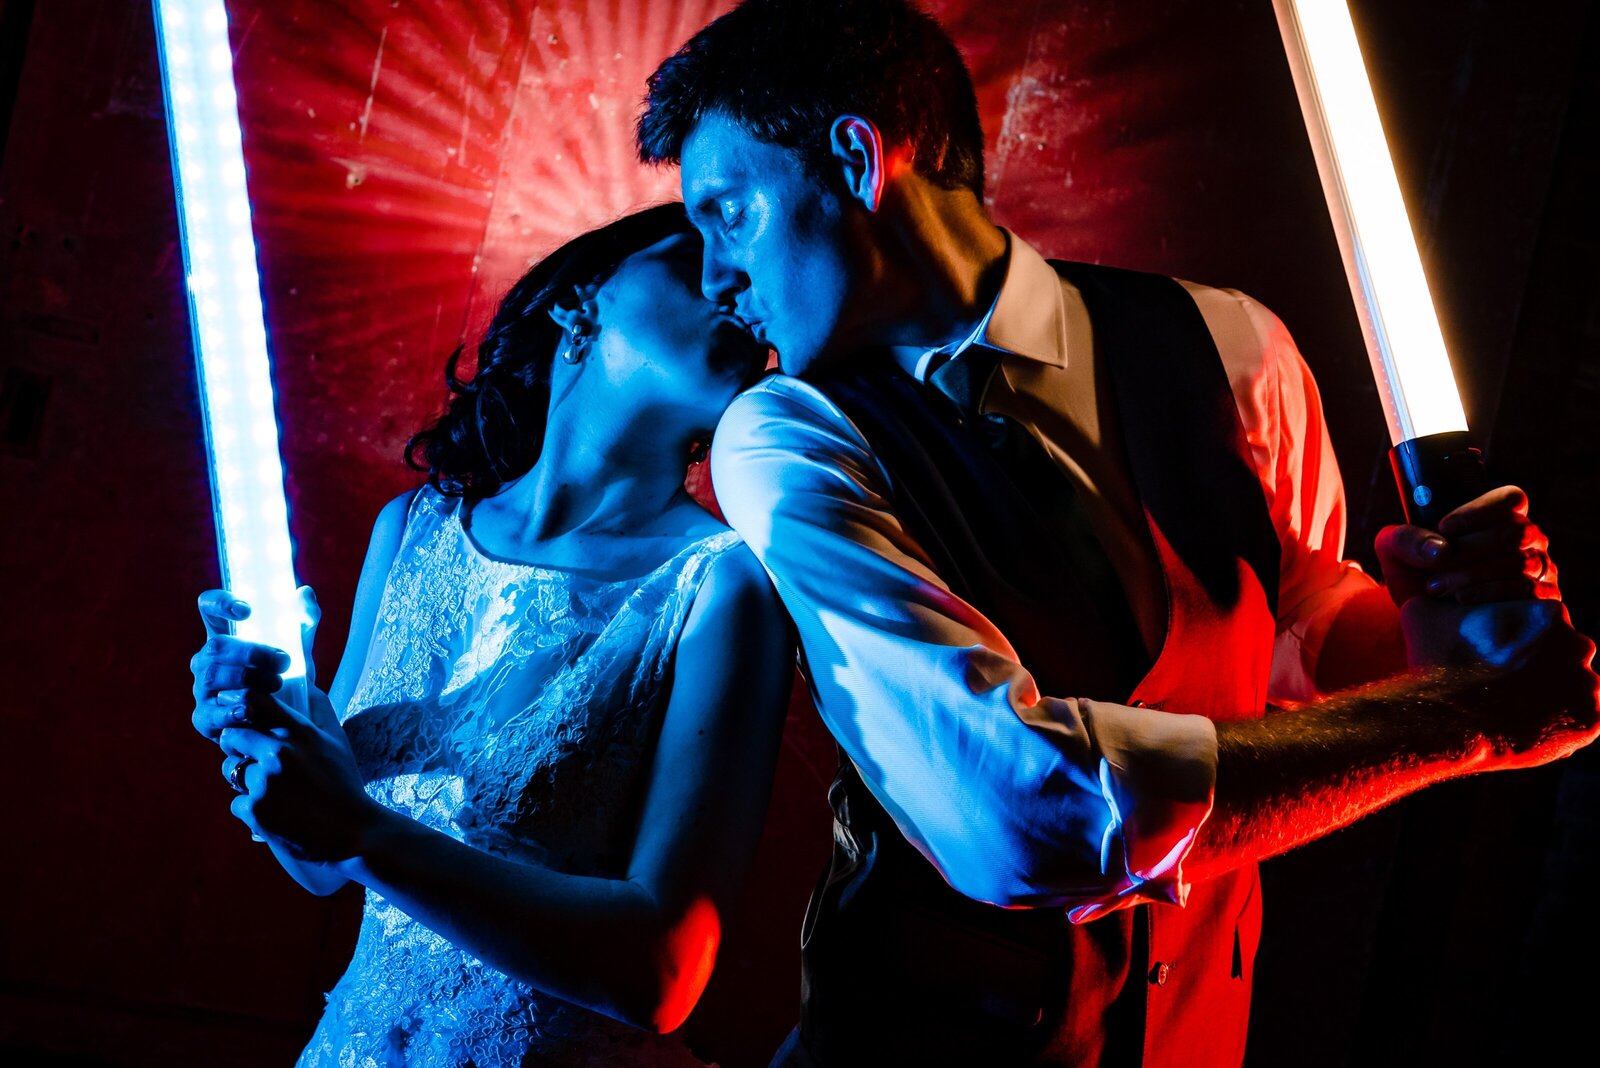 wedding couple poses in a colorful portrait with lightsabers